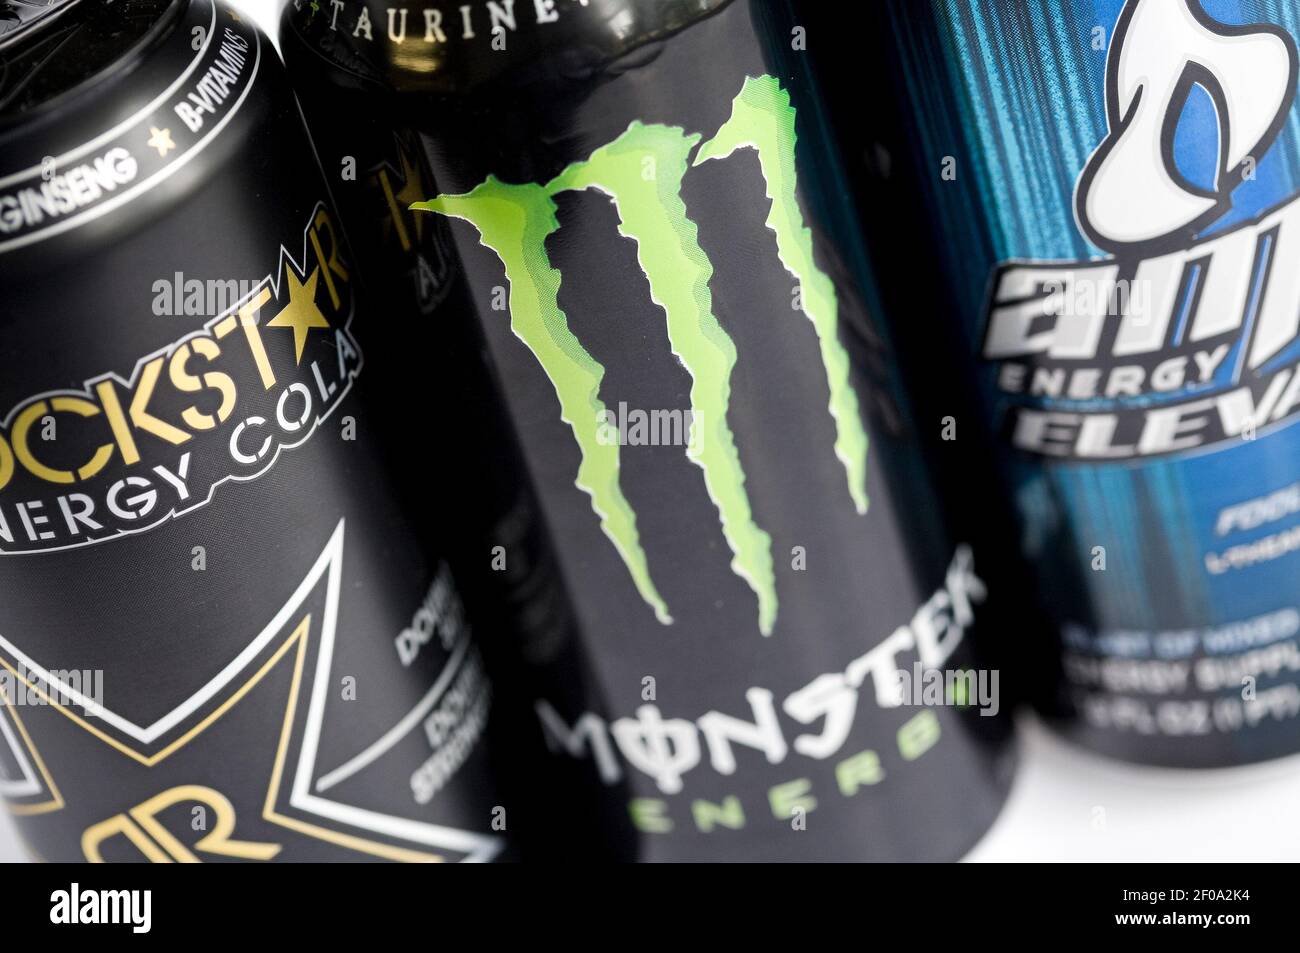 FILE- Washington, D.C. - A mix of RockStar, Monster, AMP and Red Bull energy drinks. Food and Drug Administration recently reports of five people that may have died after drinking